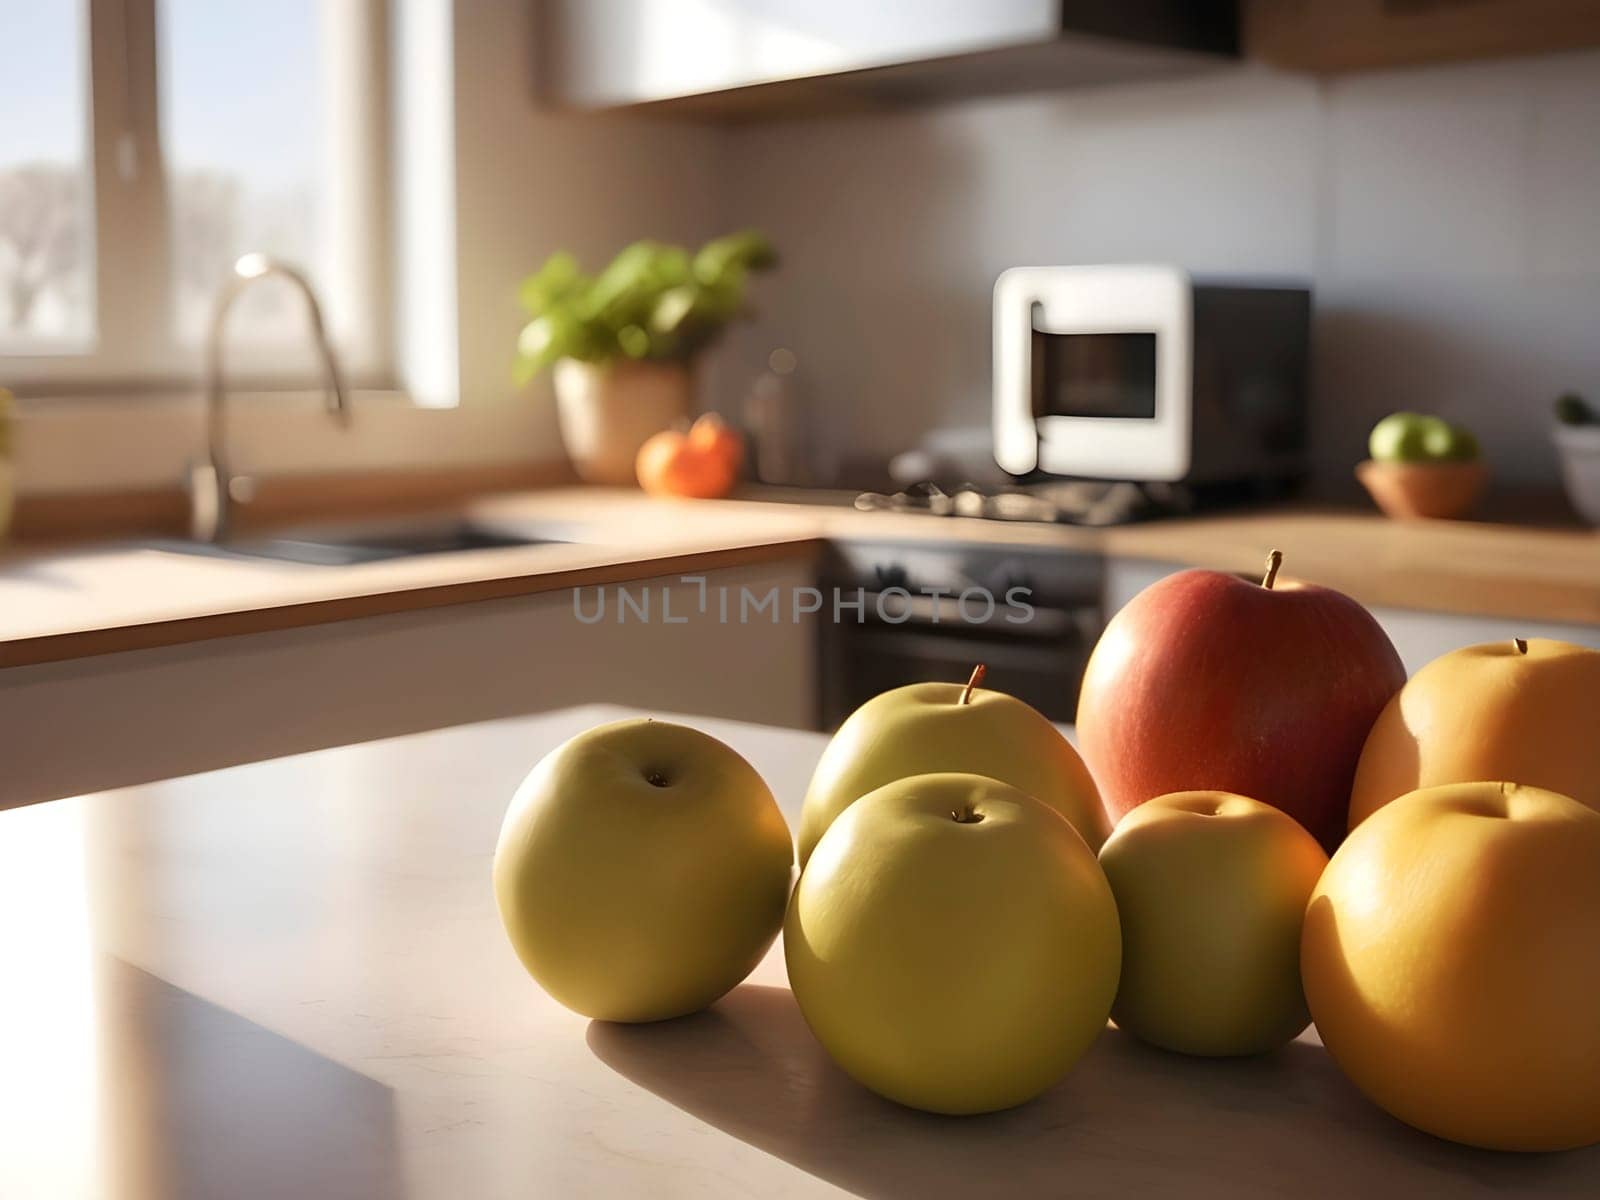 Golden Harvest: Giaca Fruit in Focus, Bathed in Afternoon Kitchen Glow.